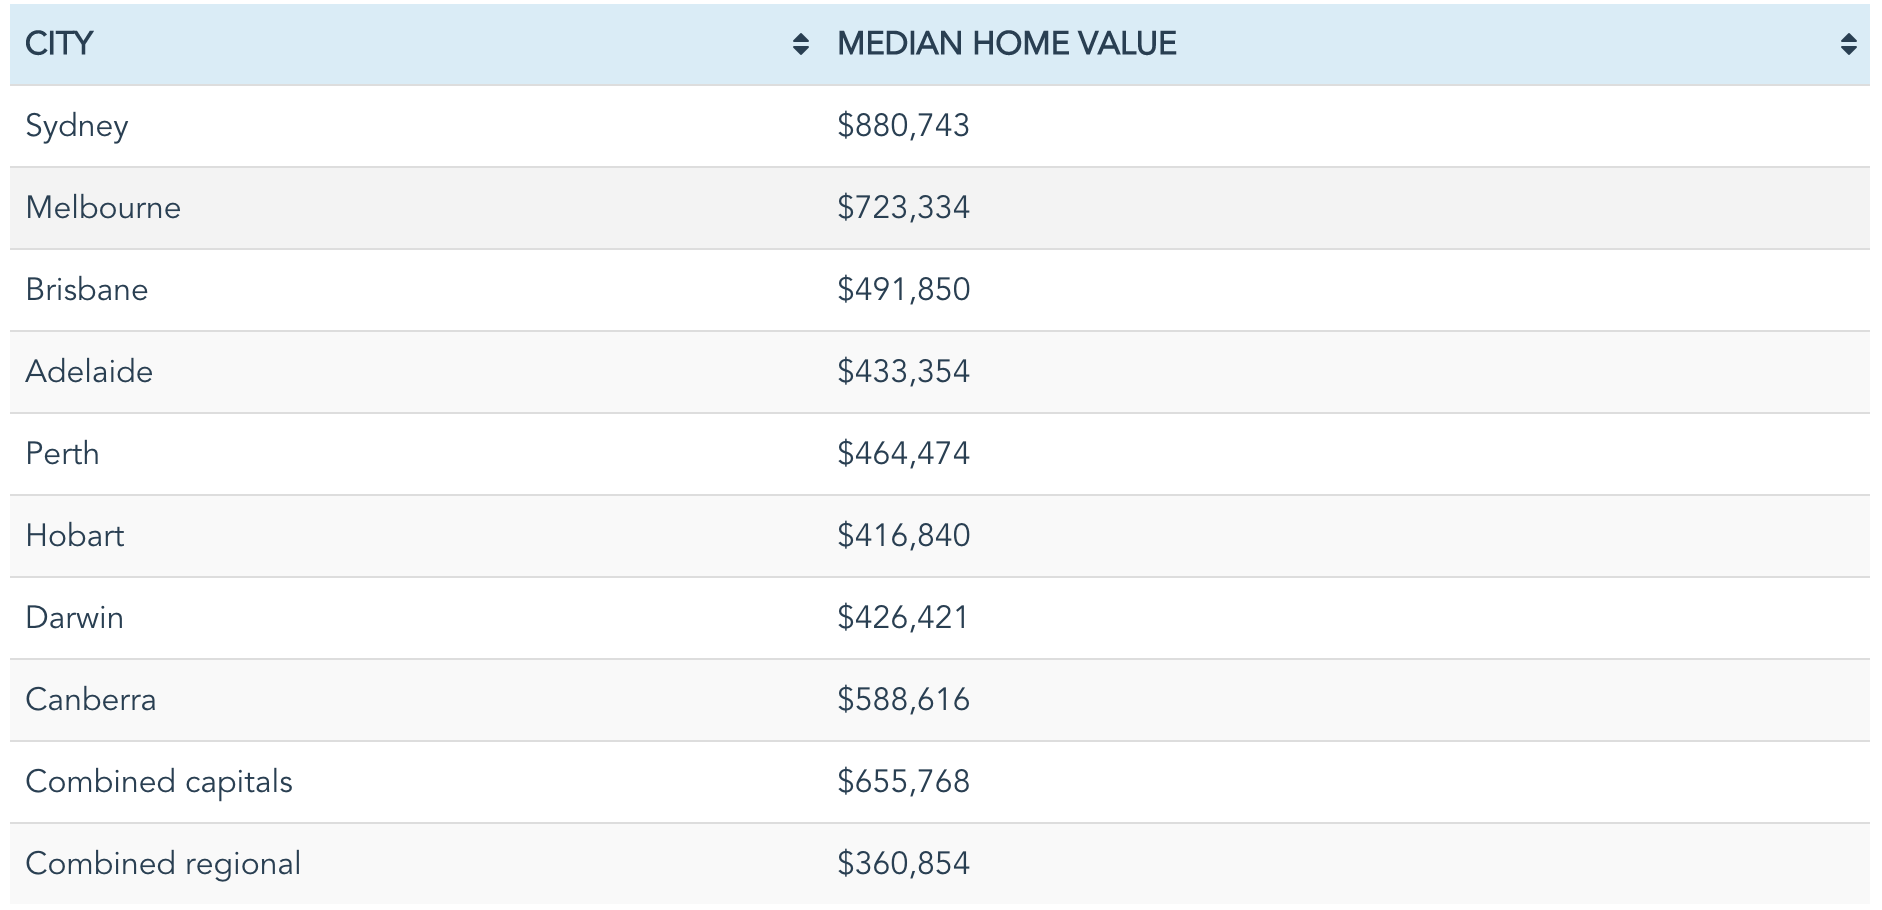 median property prices in each state change month-to-month, according to February 2018 CoreLogic data